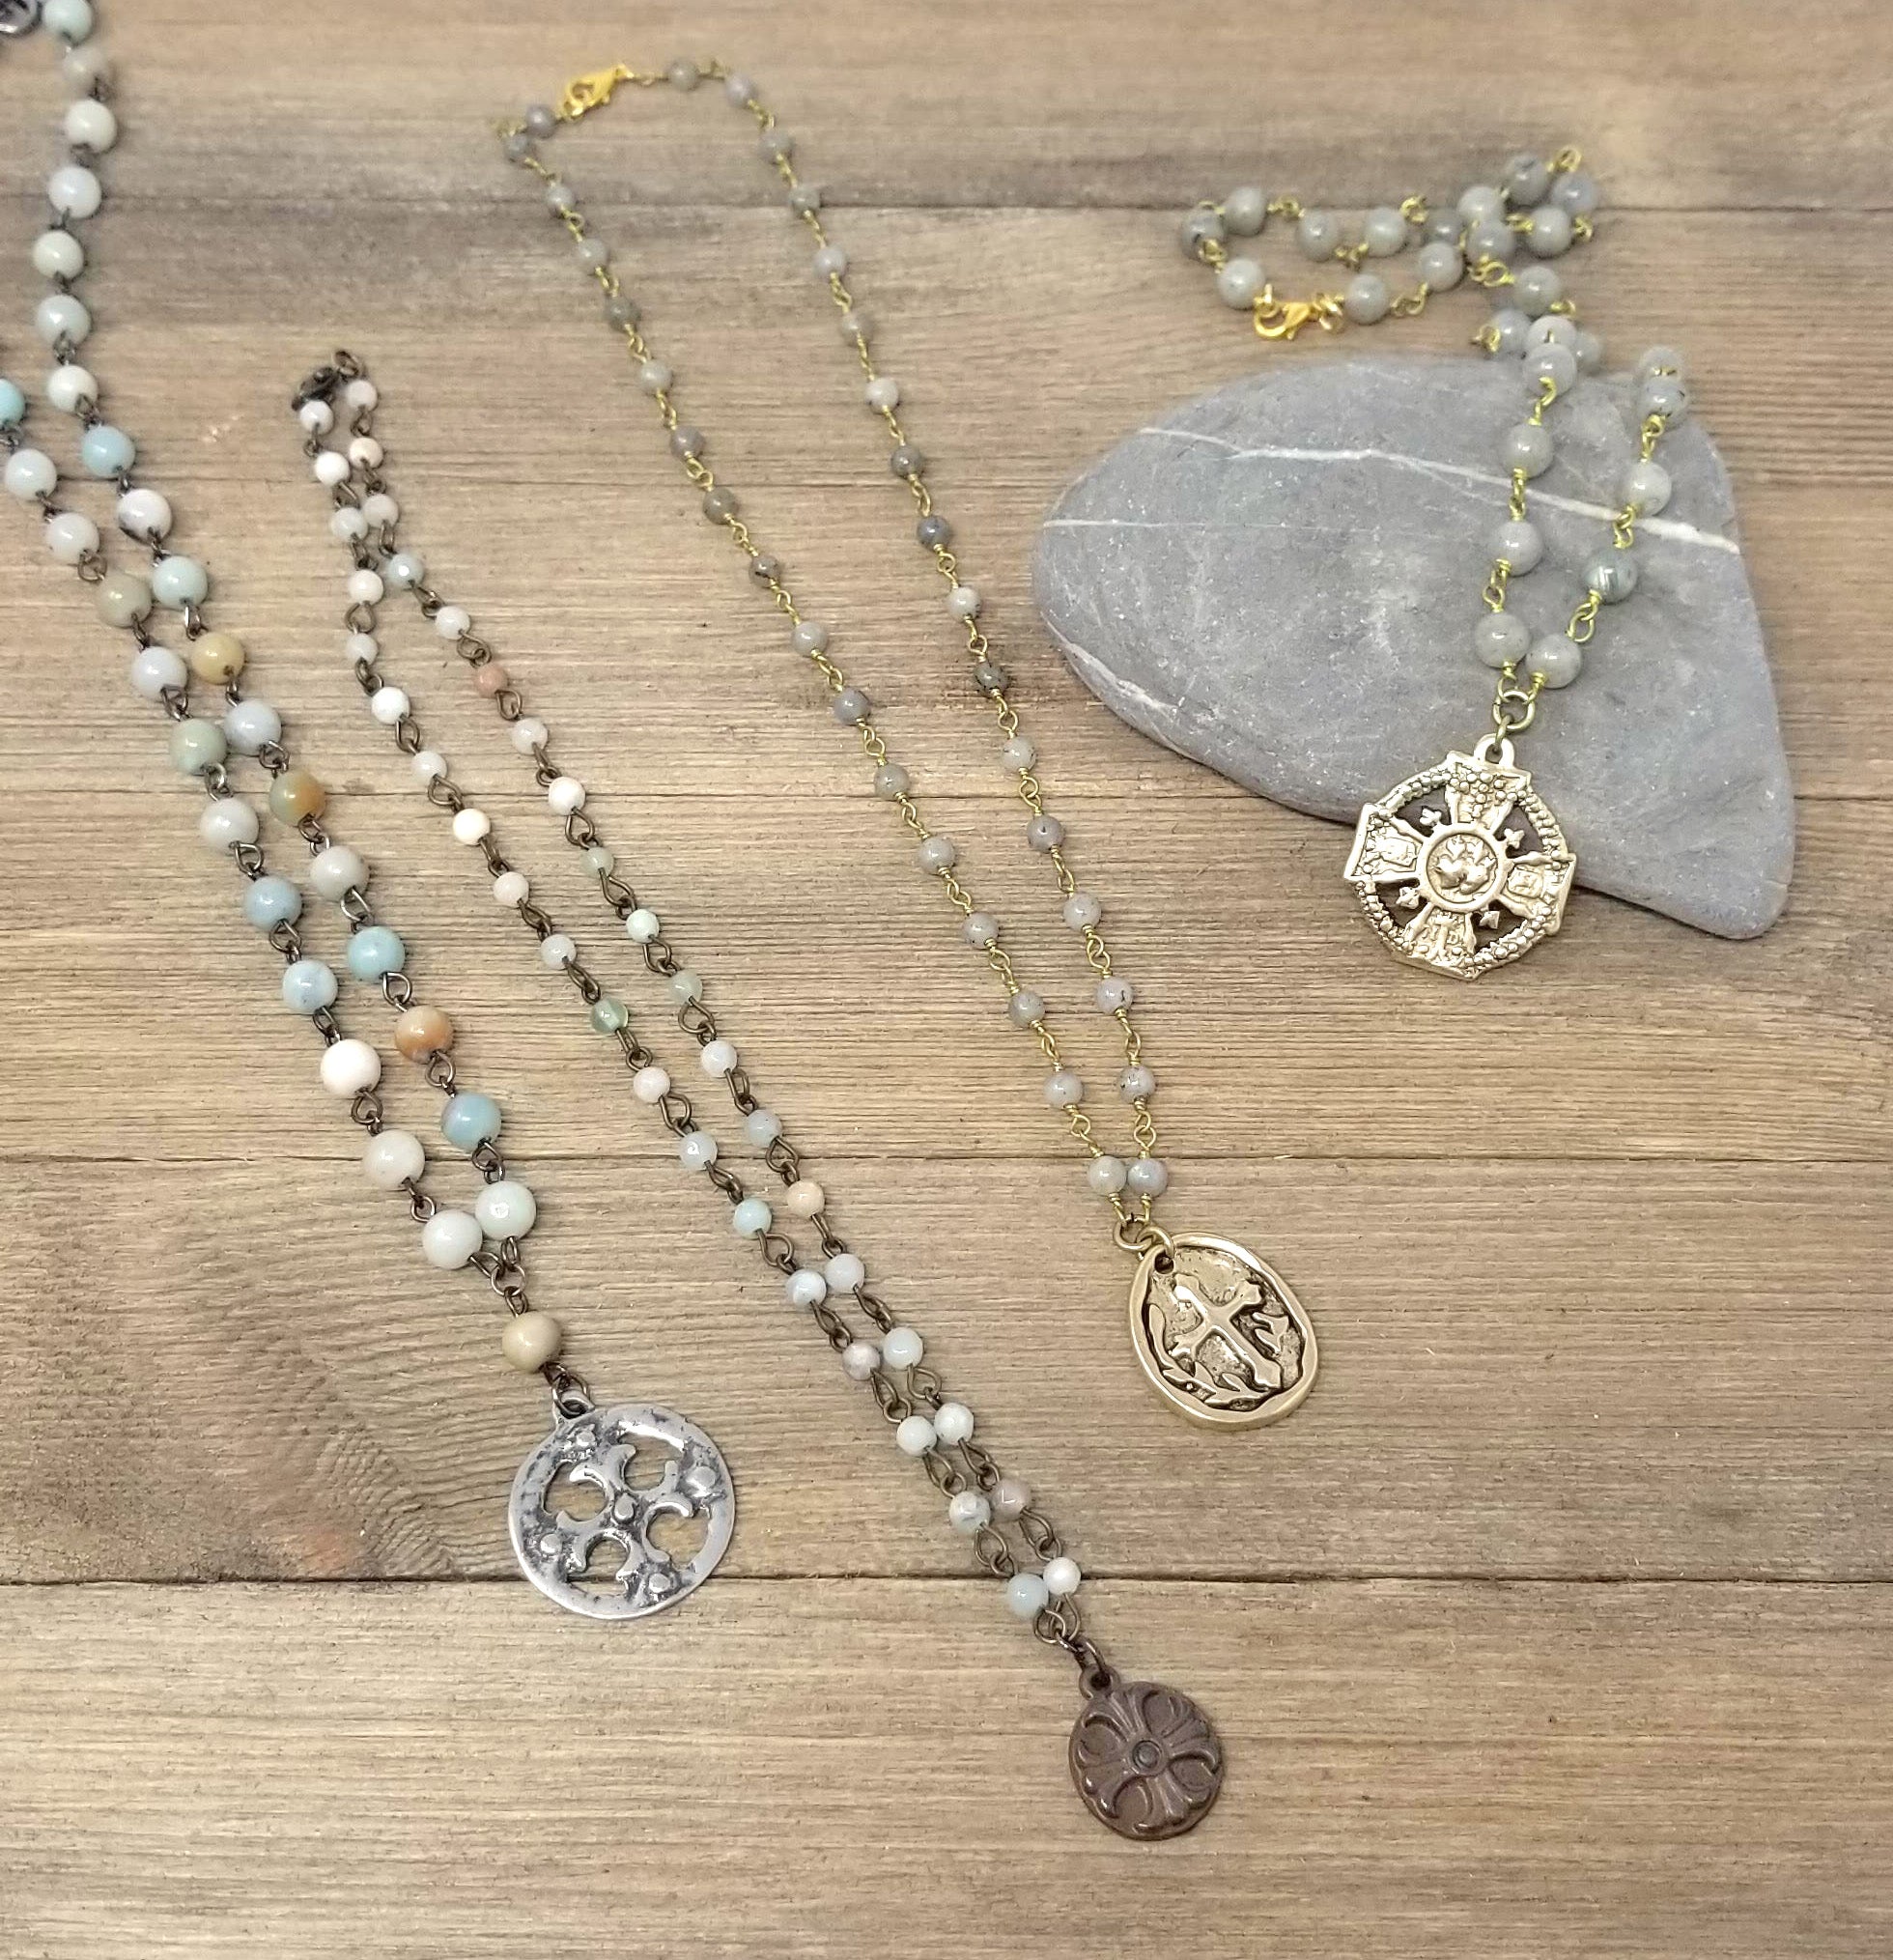 Labradorite beaded rosary chain short necklace with sacred heart pendant